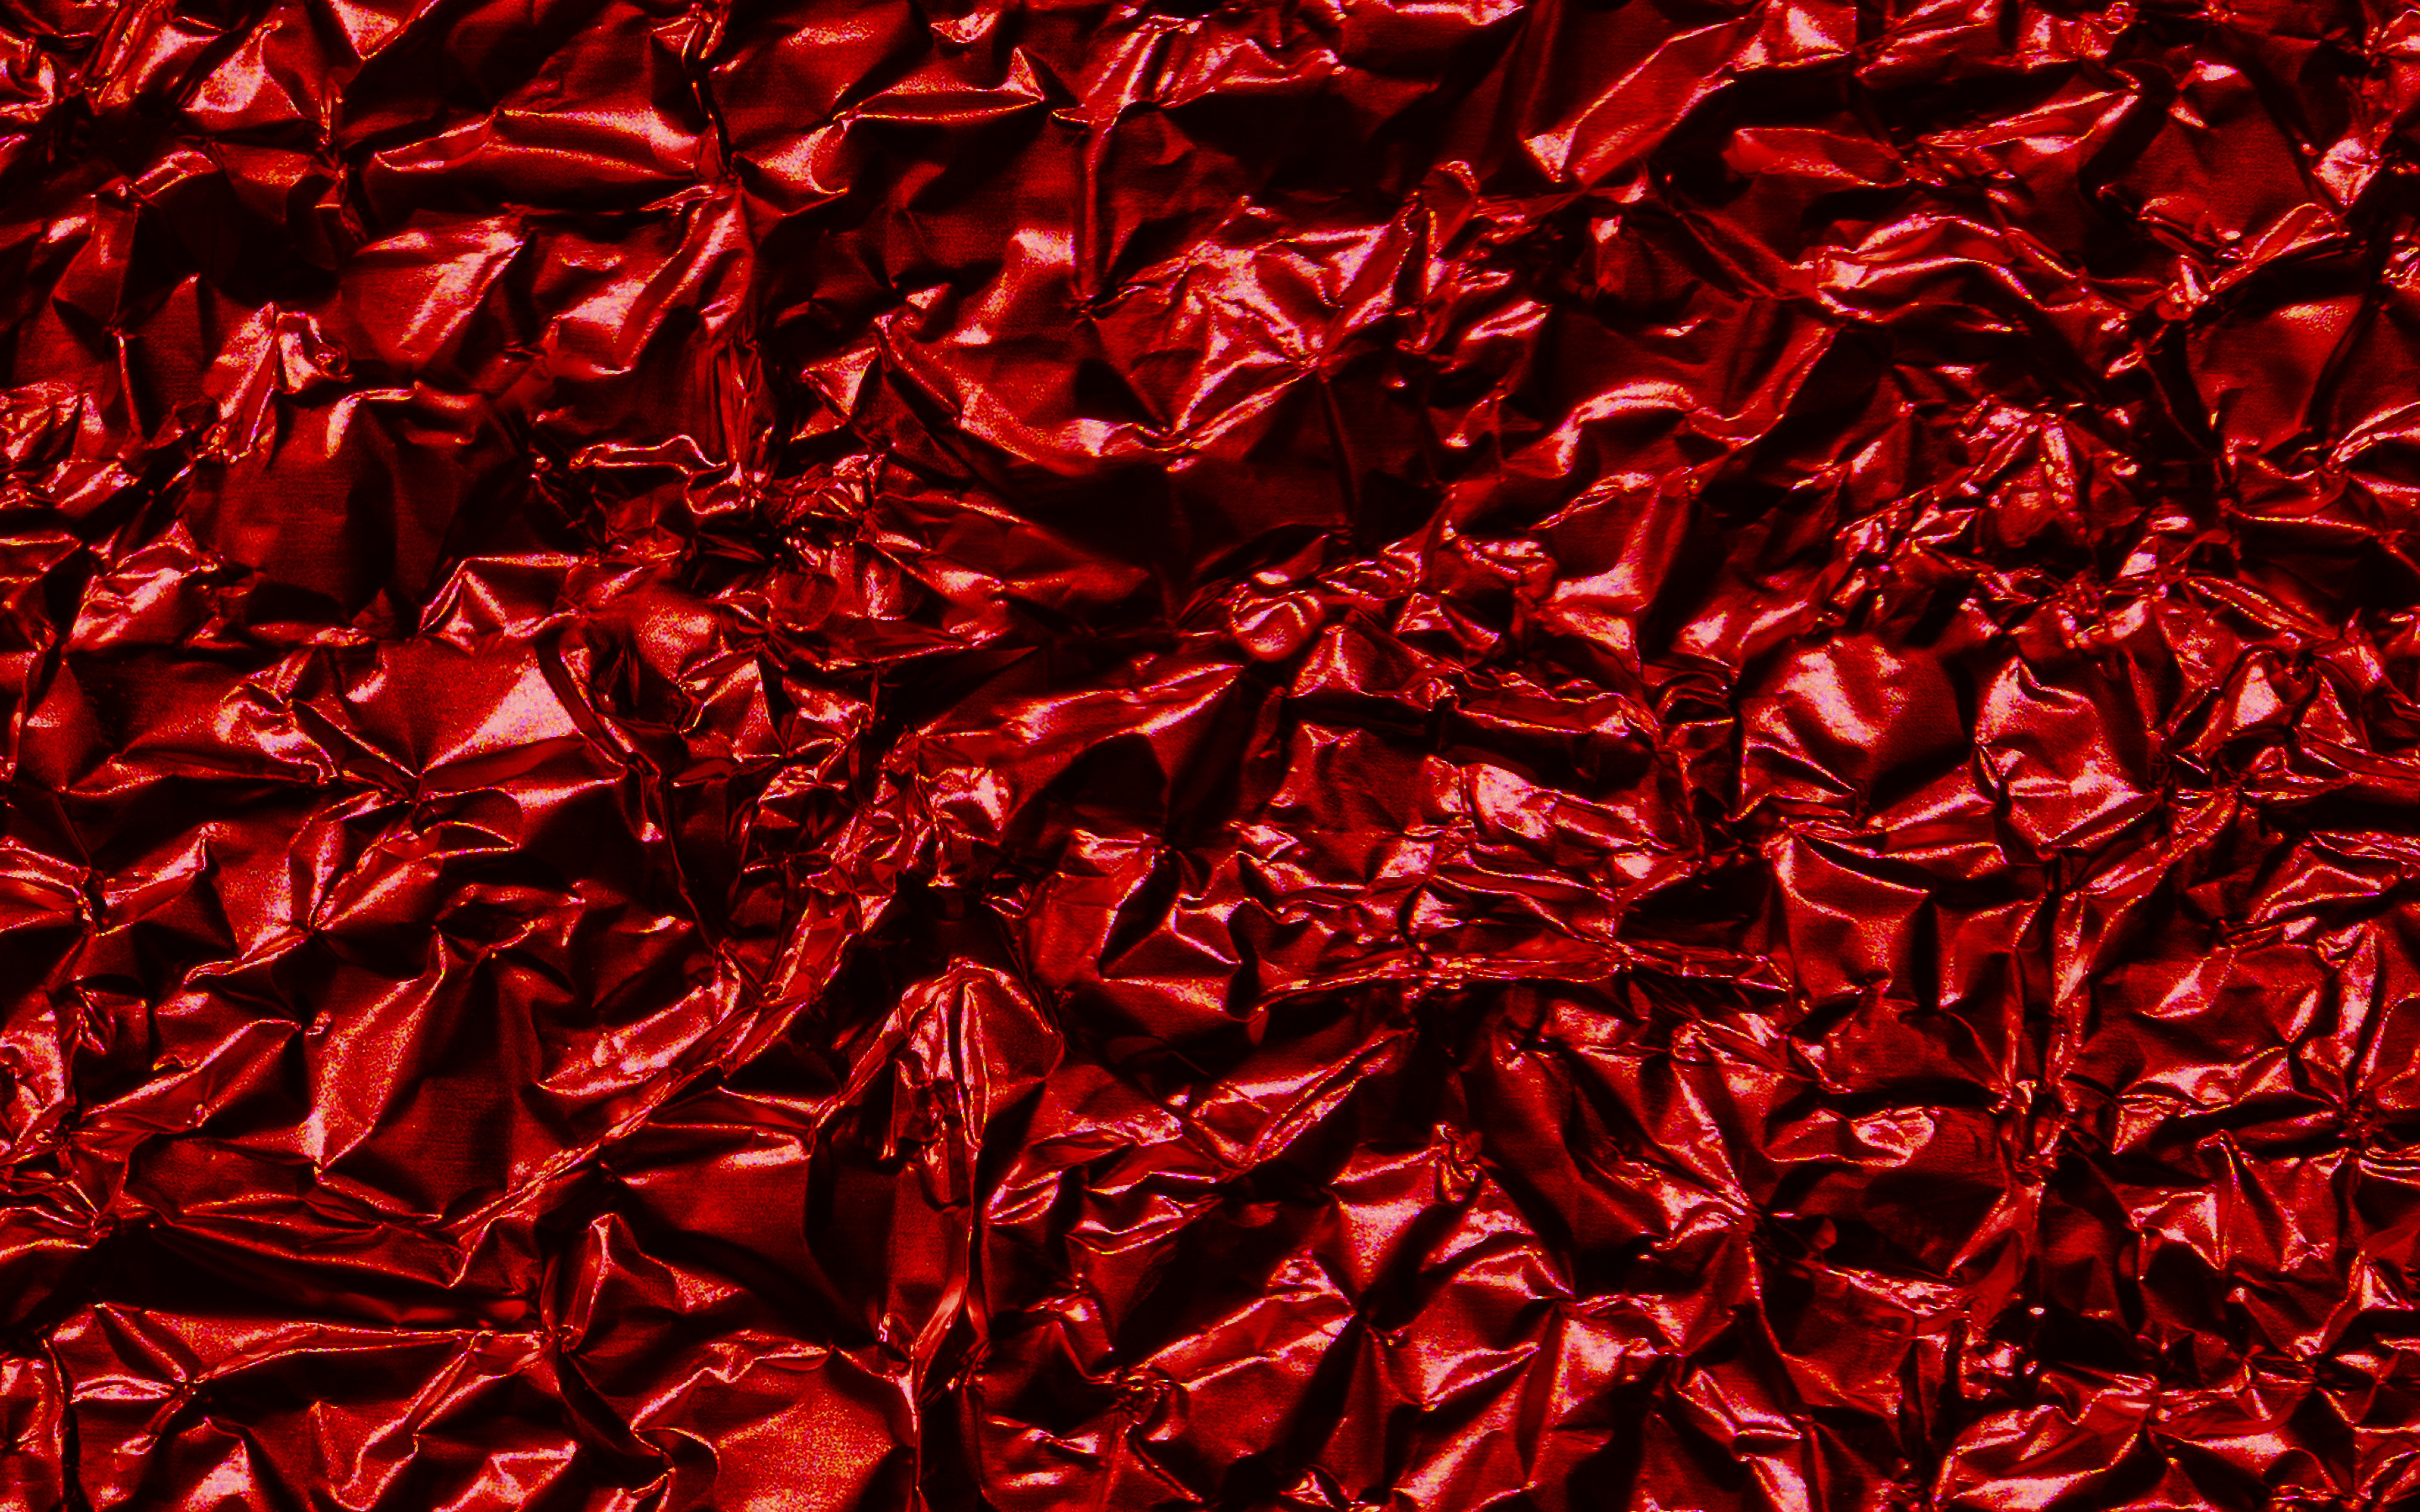 Download wallpaper red foil texture, crumpled foil texture, red foil background, foil texture, glitter paper texture for desktop with resolution 2880x1800. High Quality HD picture wallpaper